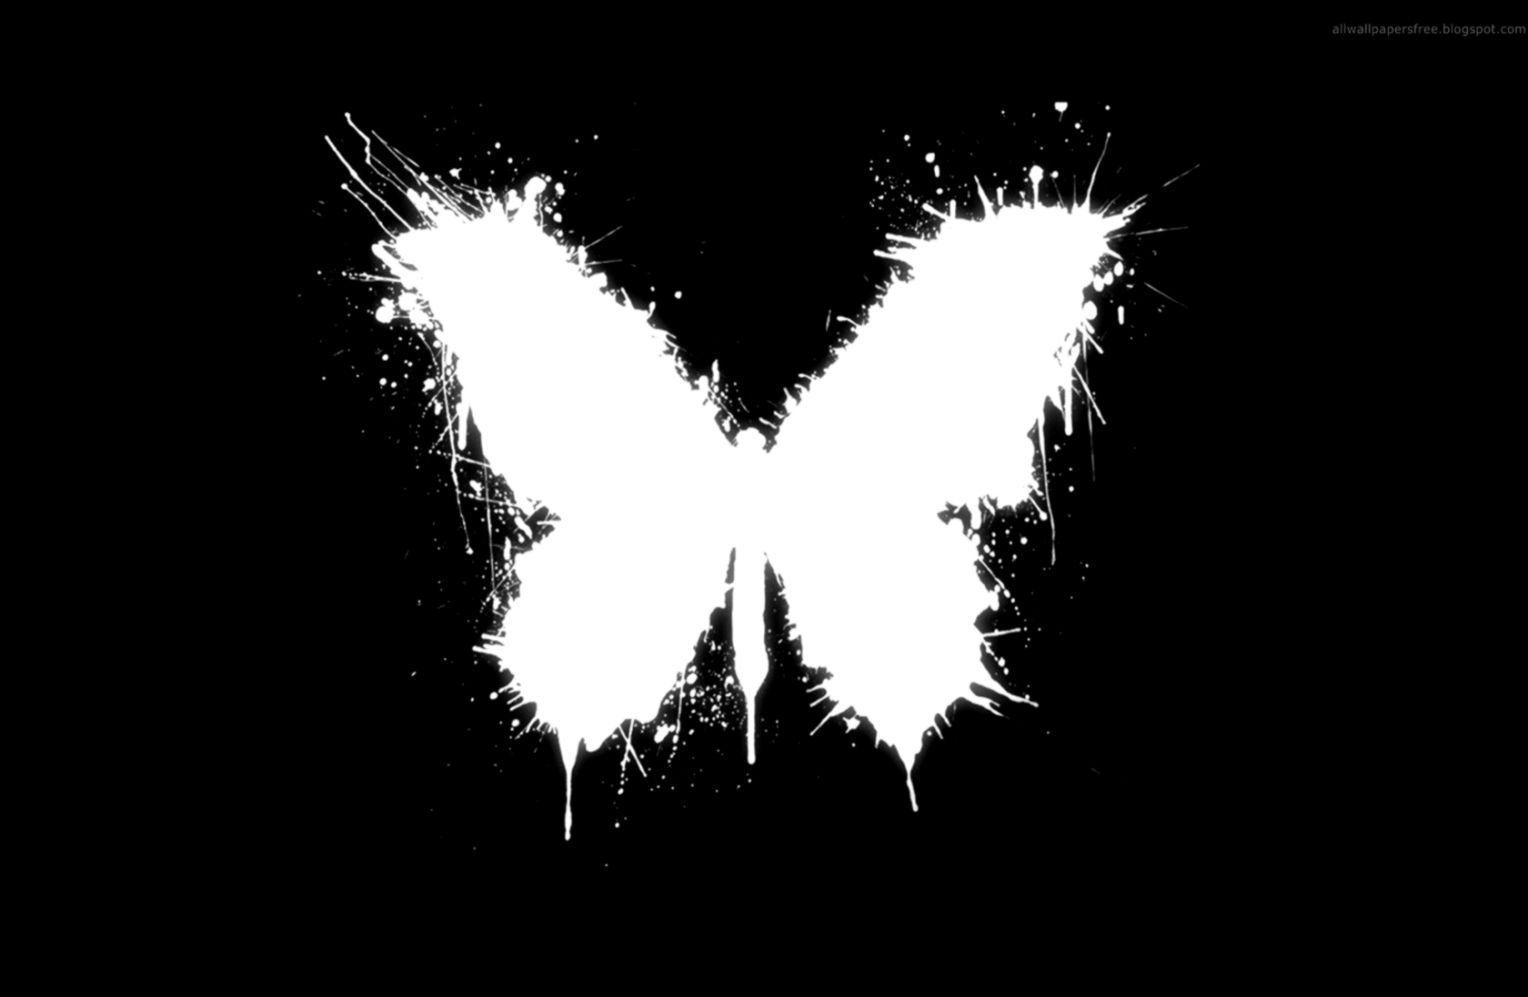 Aesthetic Butterfly Wallpaper Black And White : Pin On Wallpapers